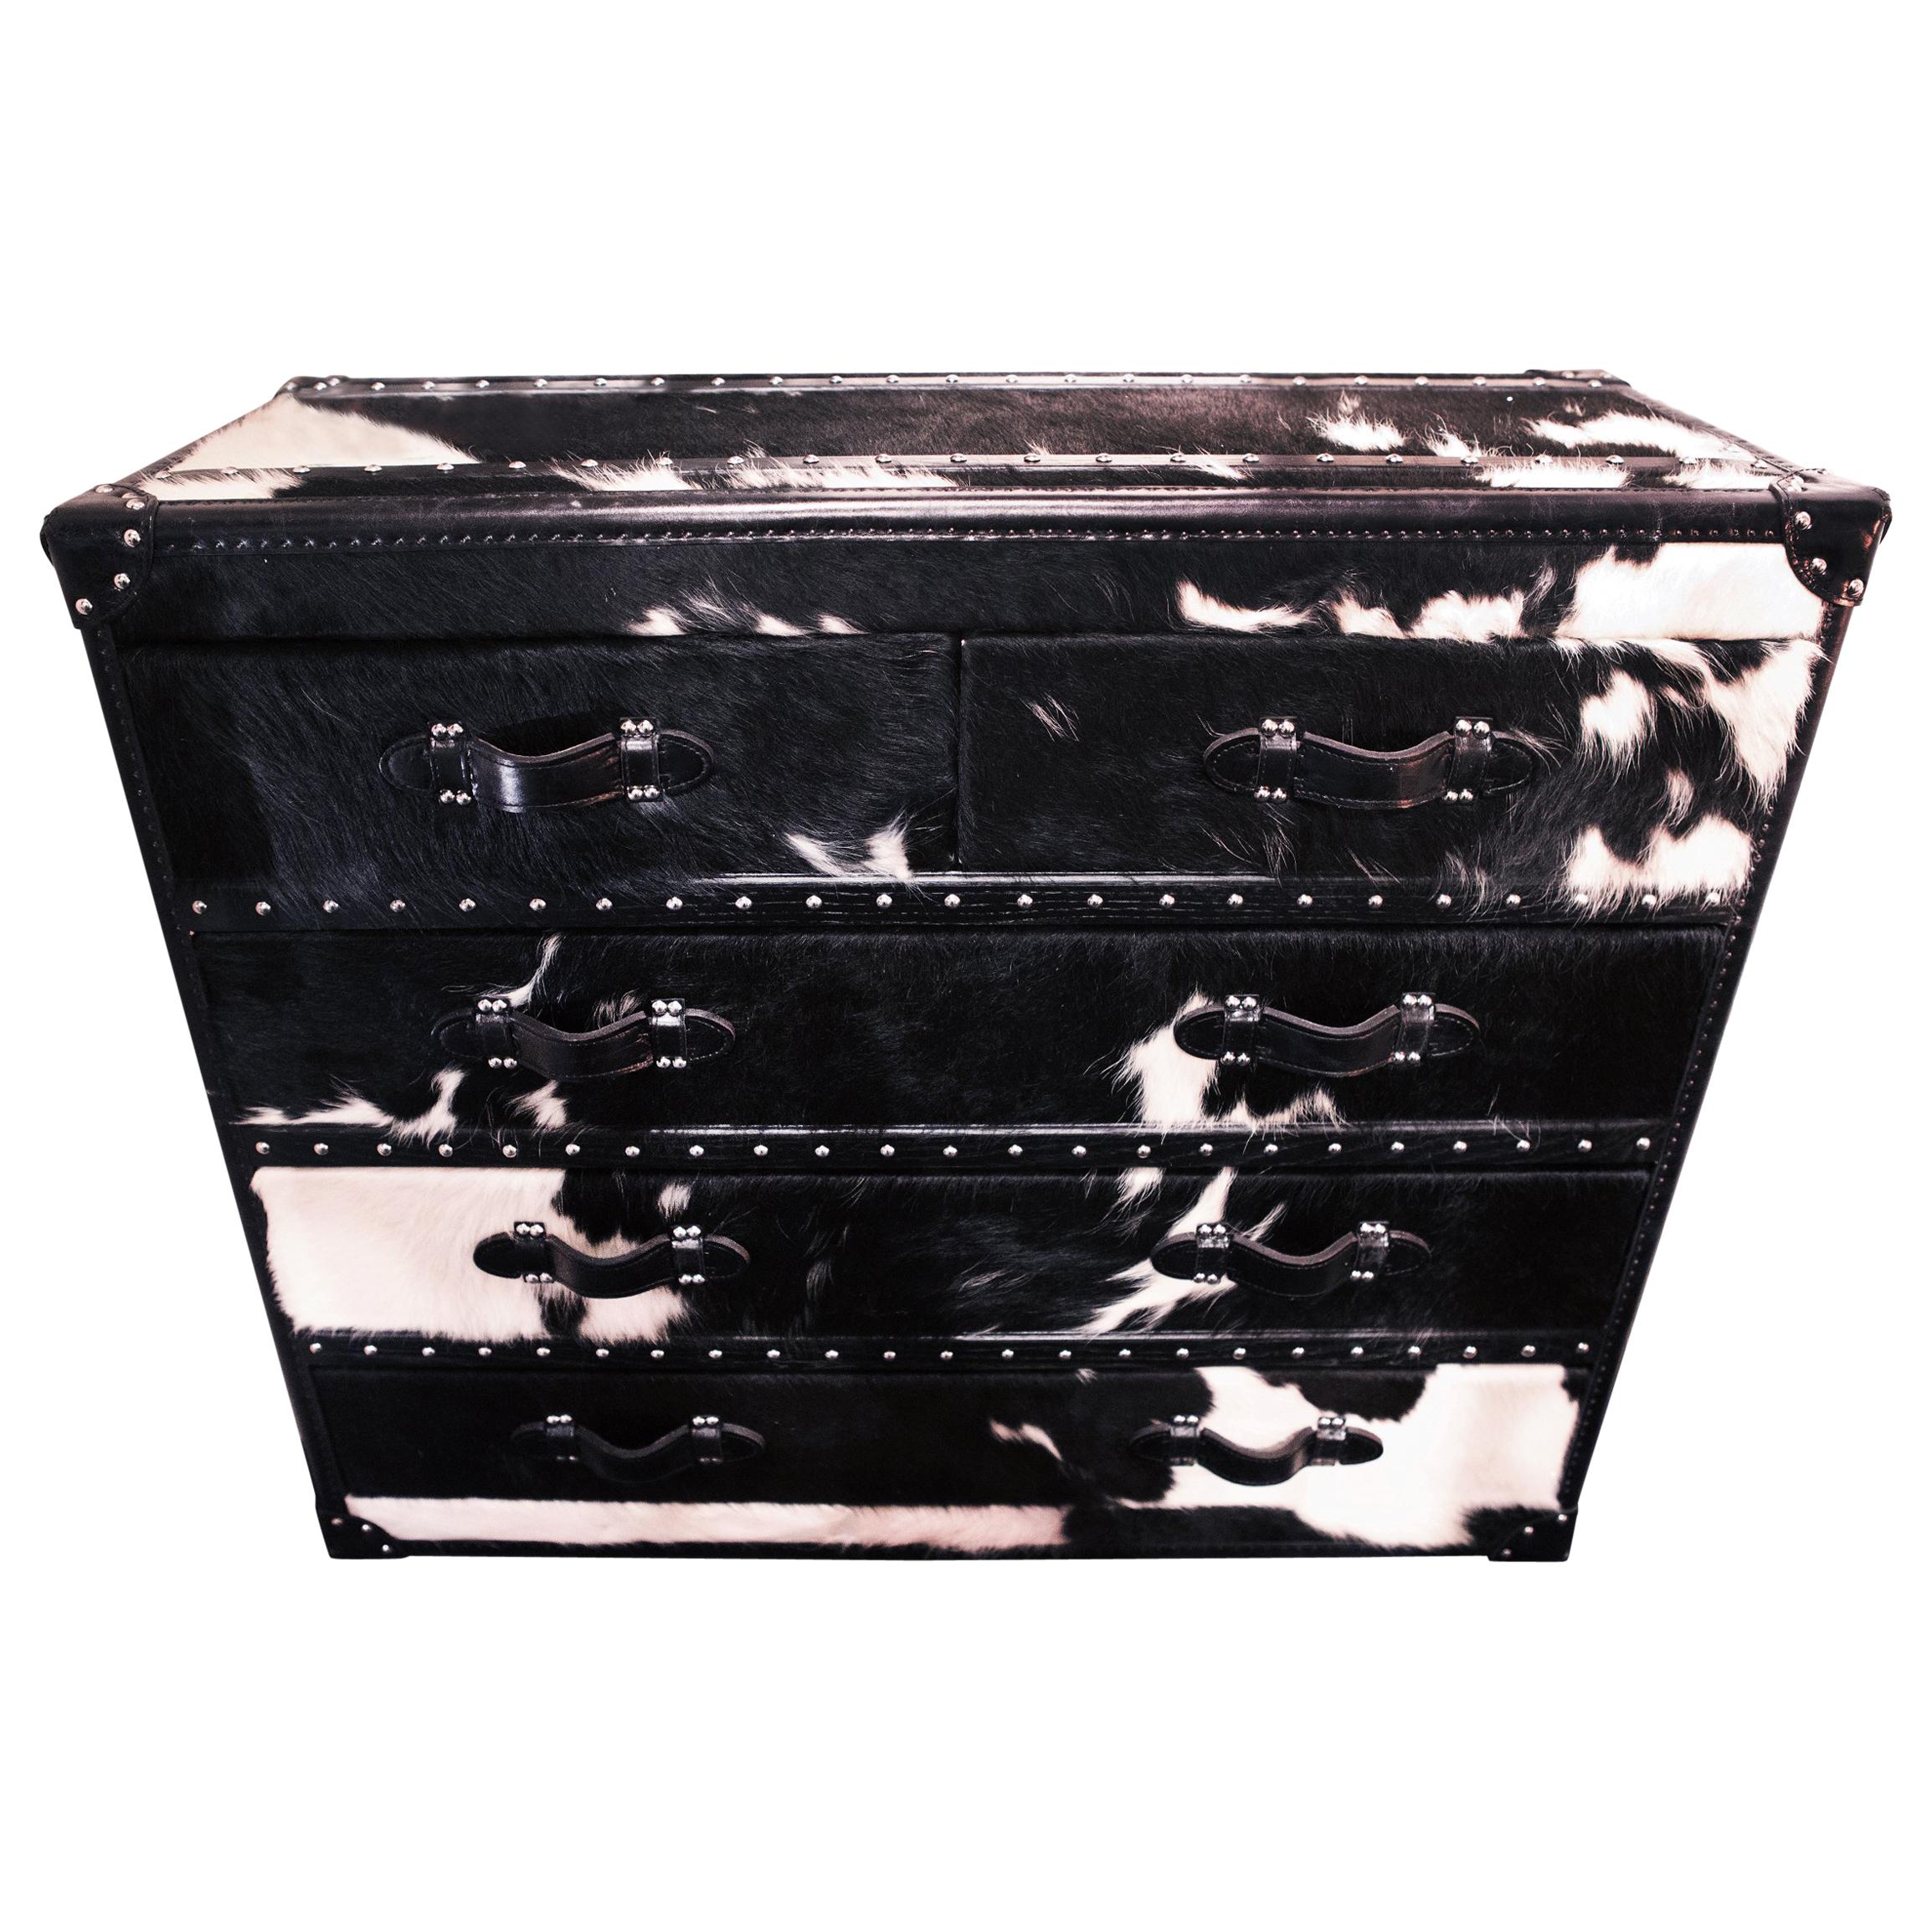 Wild Black and White Cowhide High Chest